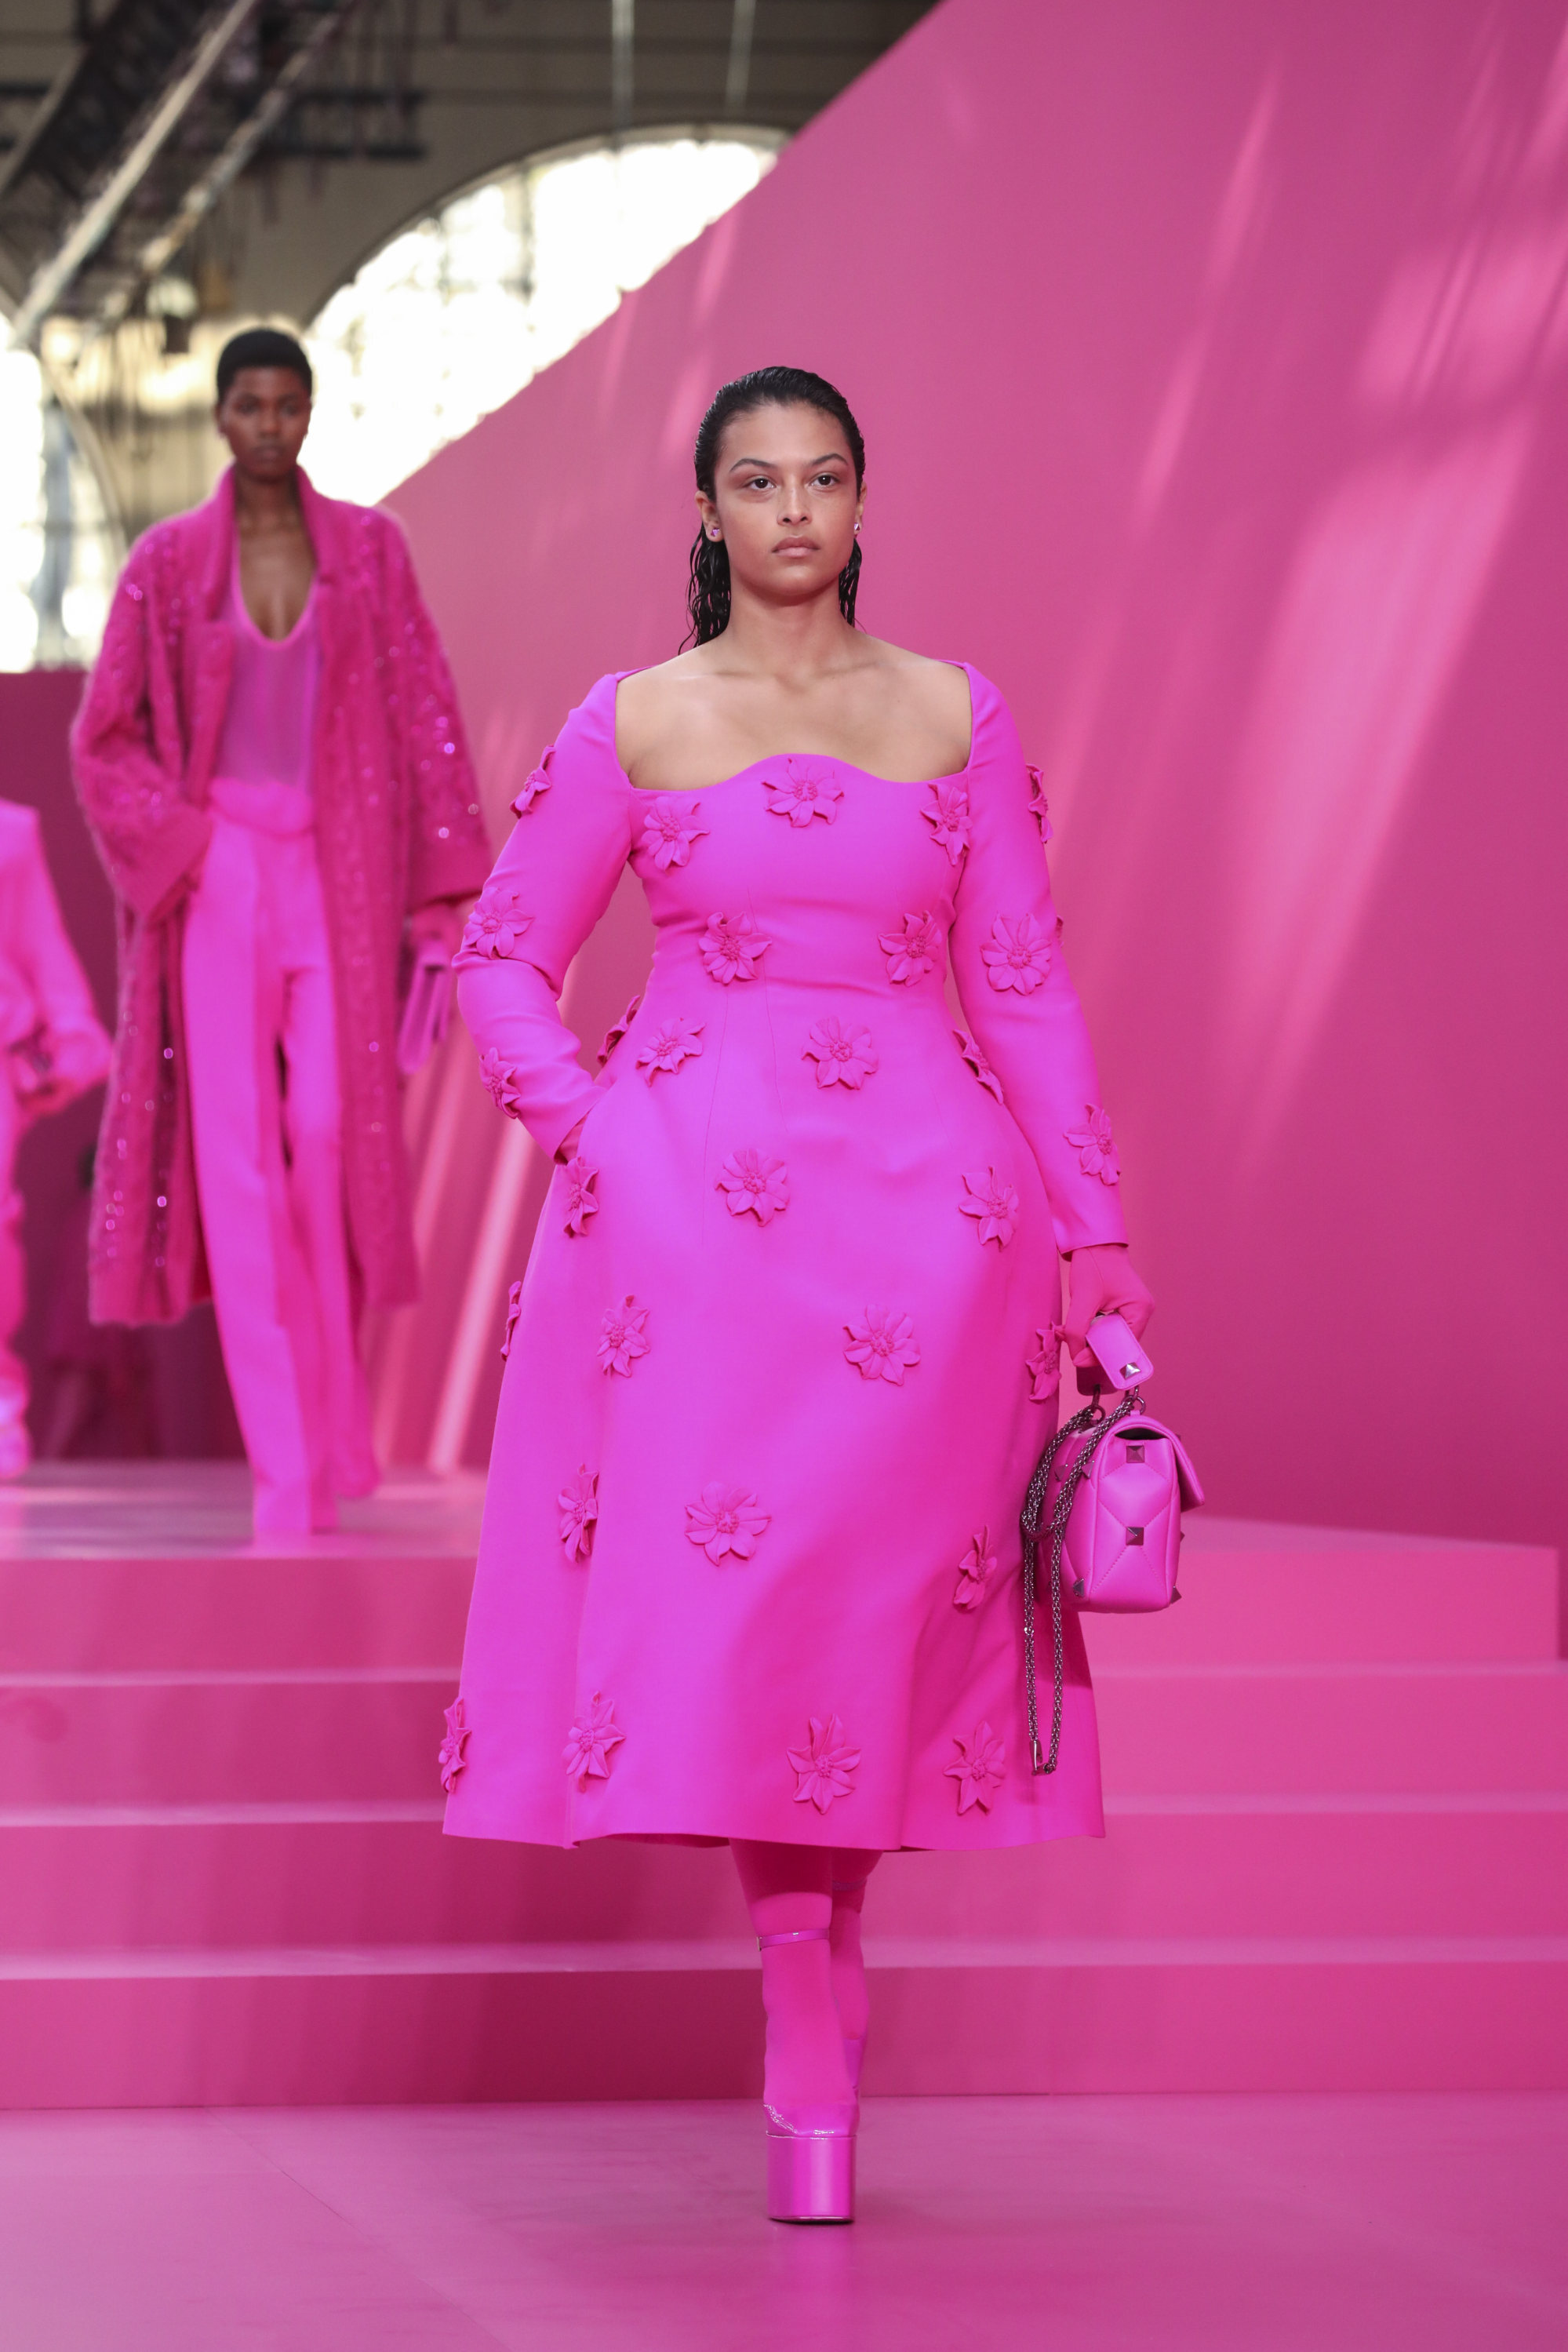 Paris Fashion Week 2022: Why did Valentino go so pink crazy? Pierpaolo ...